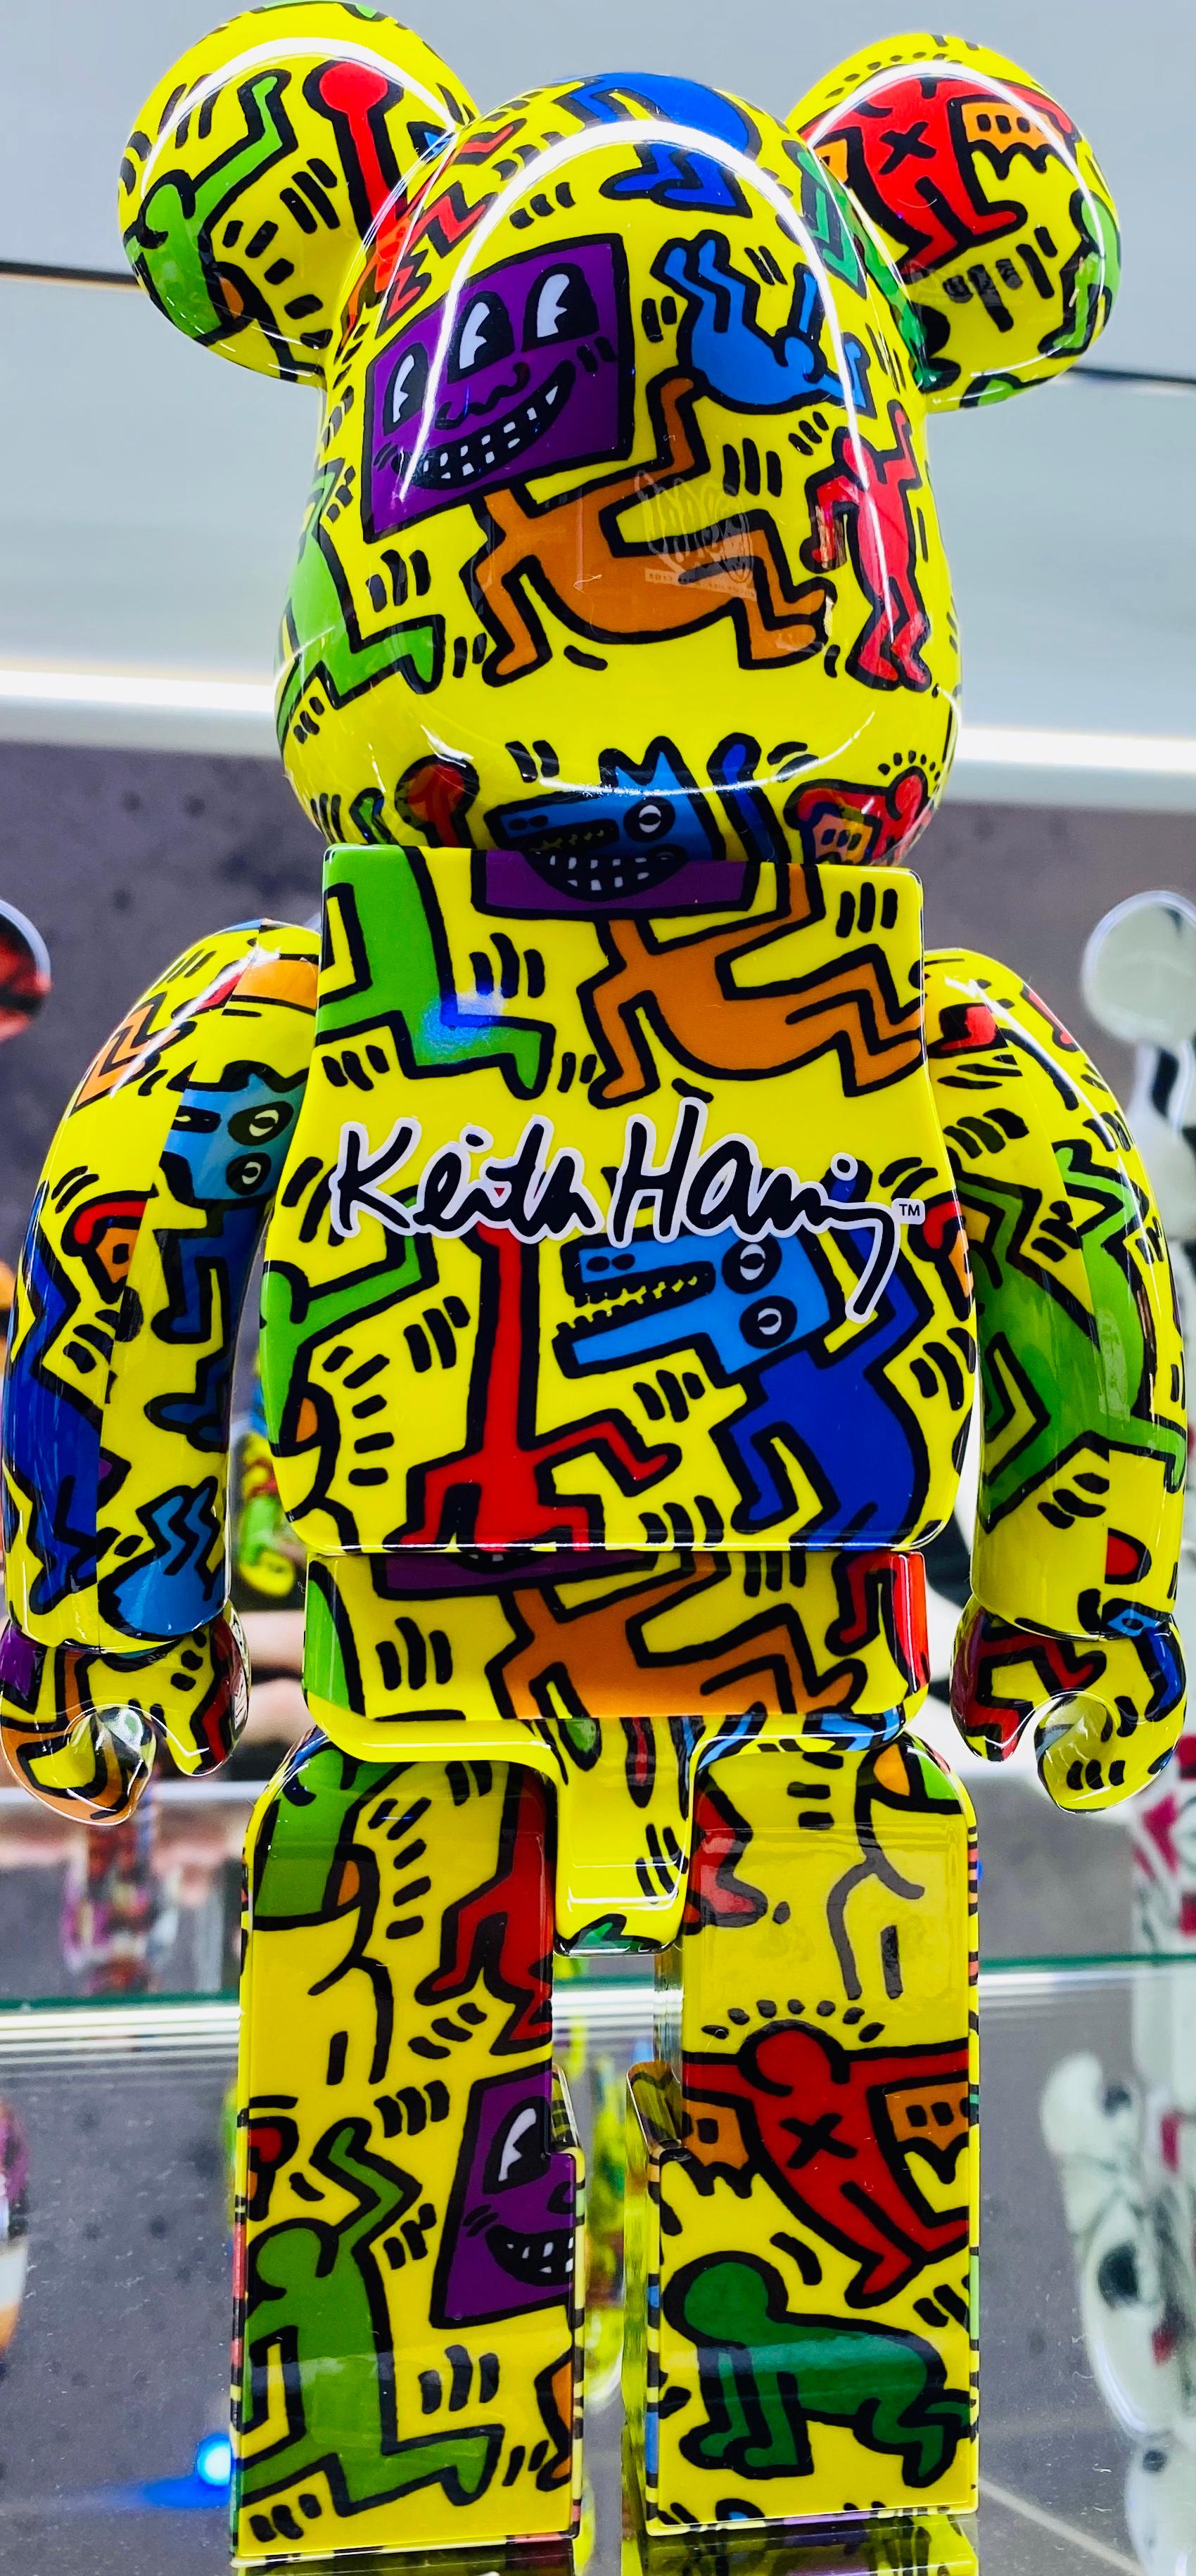 Keith Haring 400% Bearbrick Companion (Haring BE@RBRICK) - Pop Art Sculpture by (after) Keith Haring